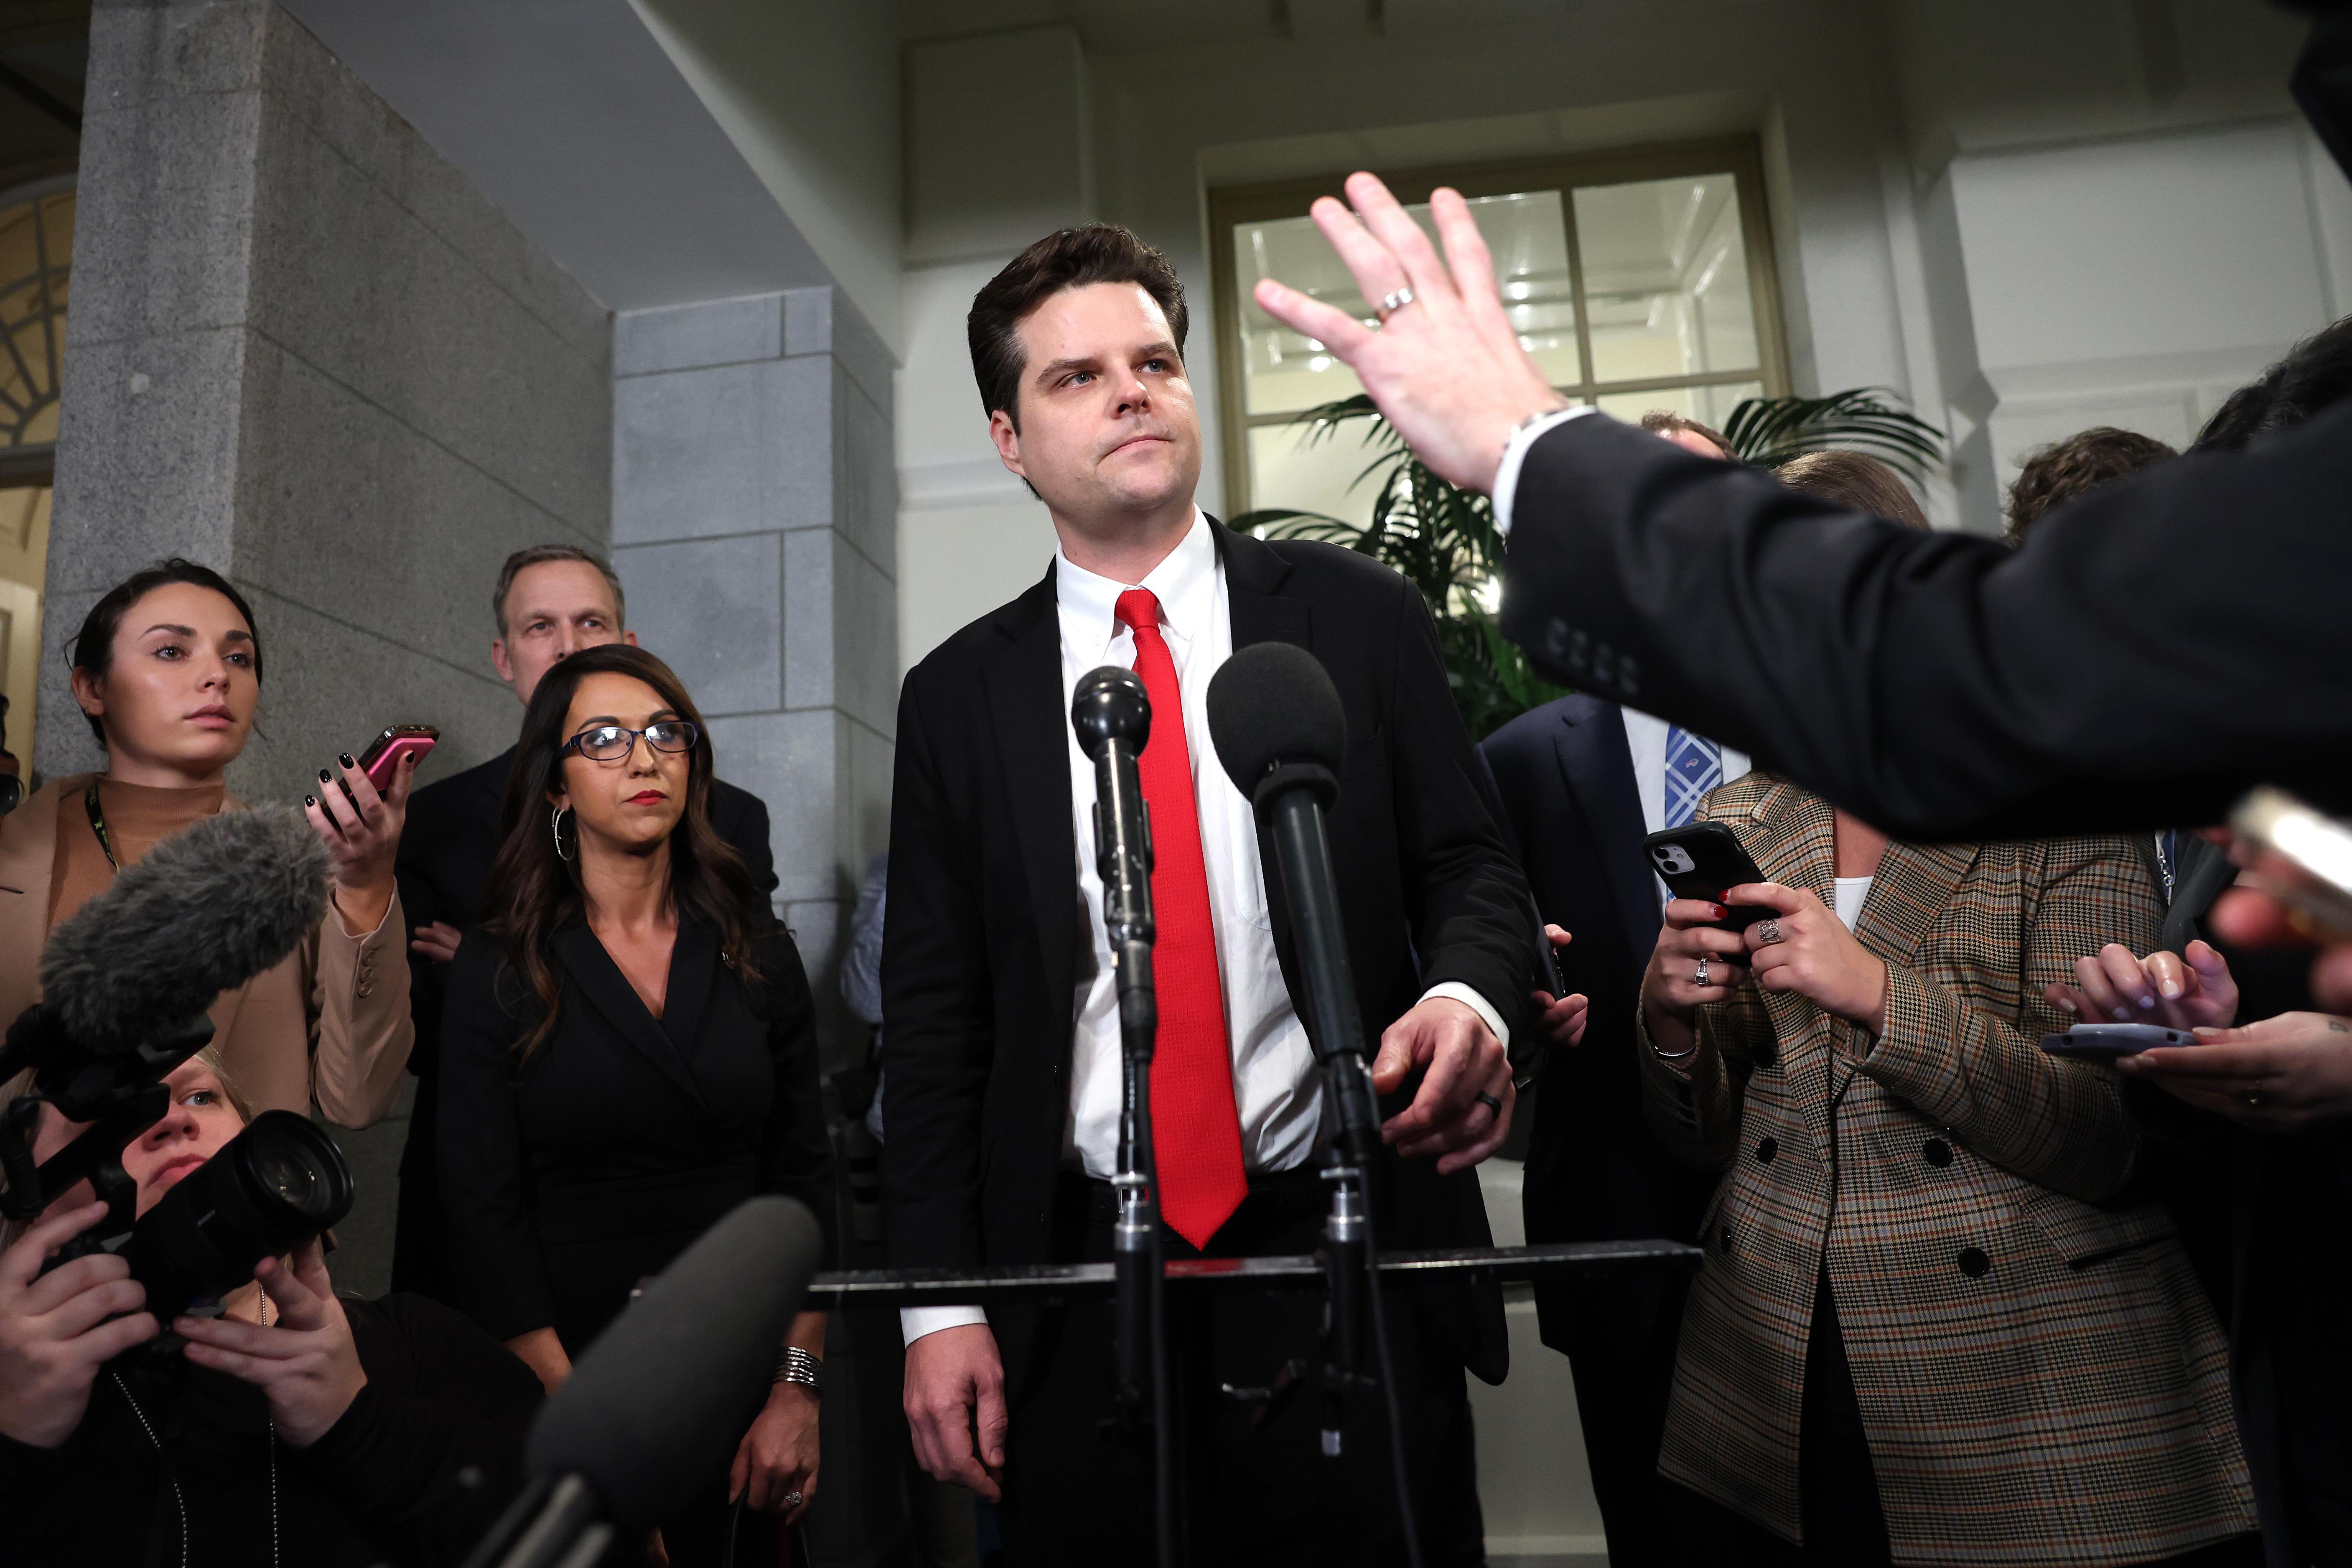 WASHINGTON, DC - JANUARY 03: U.S. Rep. Matt Gaetz (R-FL) speaks to reporters following a meeting with House Republicans at the U.S. Capitol Building on January 03, 2023 in Washington, DC. Today members of the 118th Congress will be sworn in and the House of Representatives will hold votes on a new Speaker of the House. Gaetz was joined by Rep. Lauren Boebert (R-CO) (2nd L) and Rep. Scott Perry (R-PA).  (Photo by Kevin Dietsch/Getty Images)